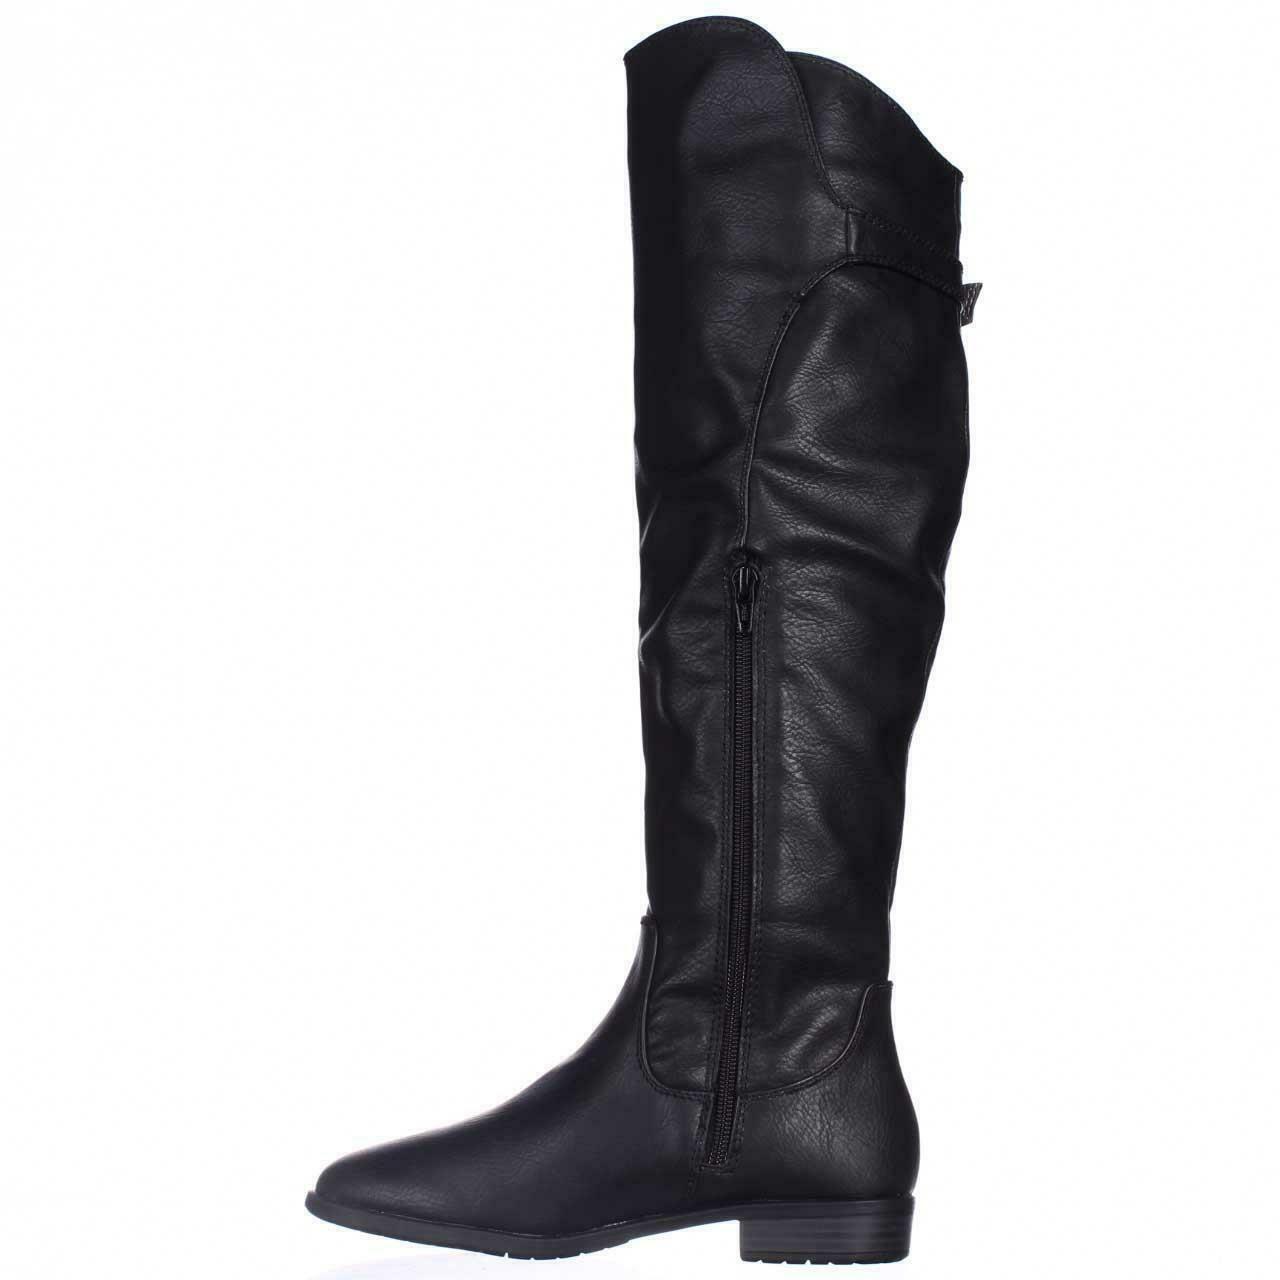 Rialto Firstrow Over The Knee Boots, Black, 5 US - Boots